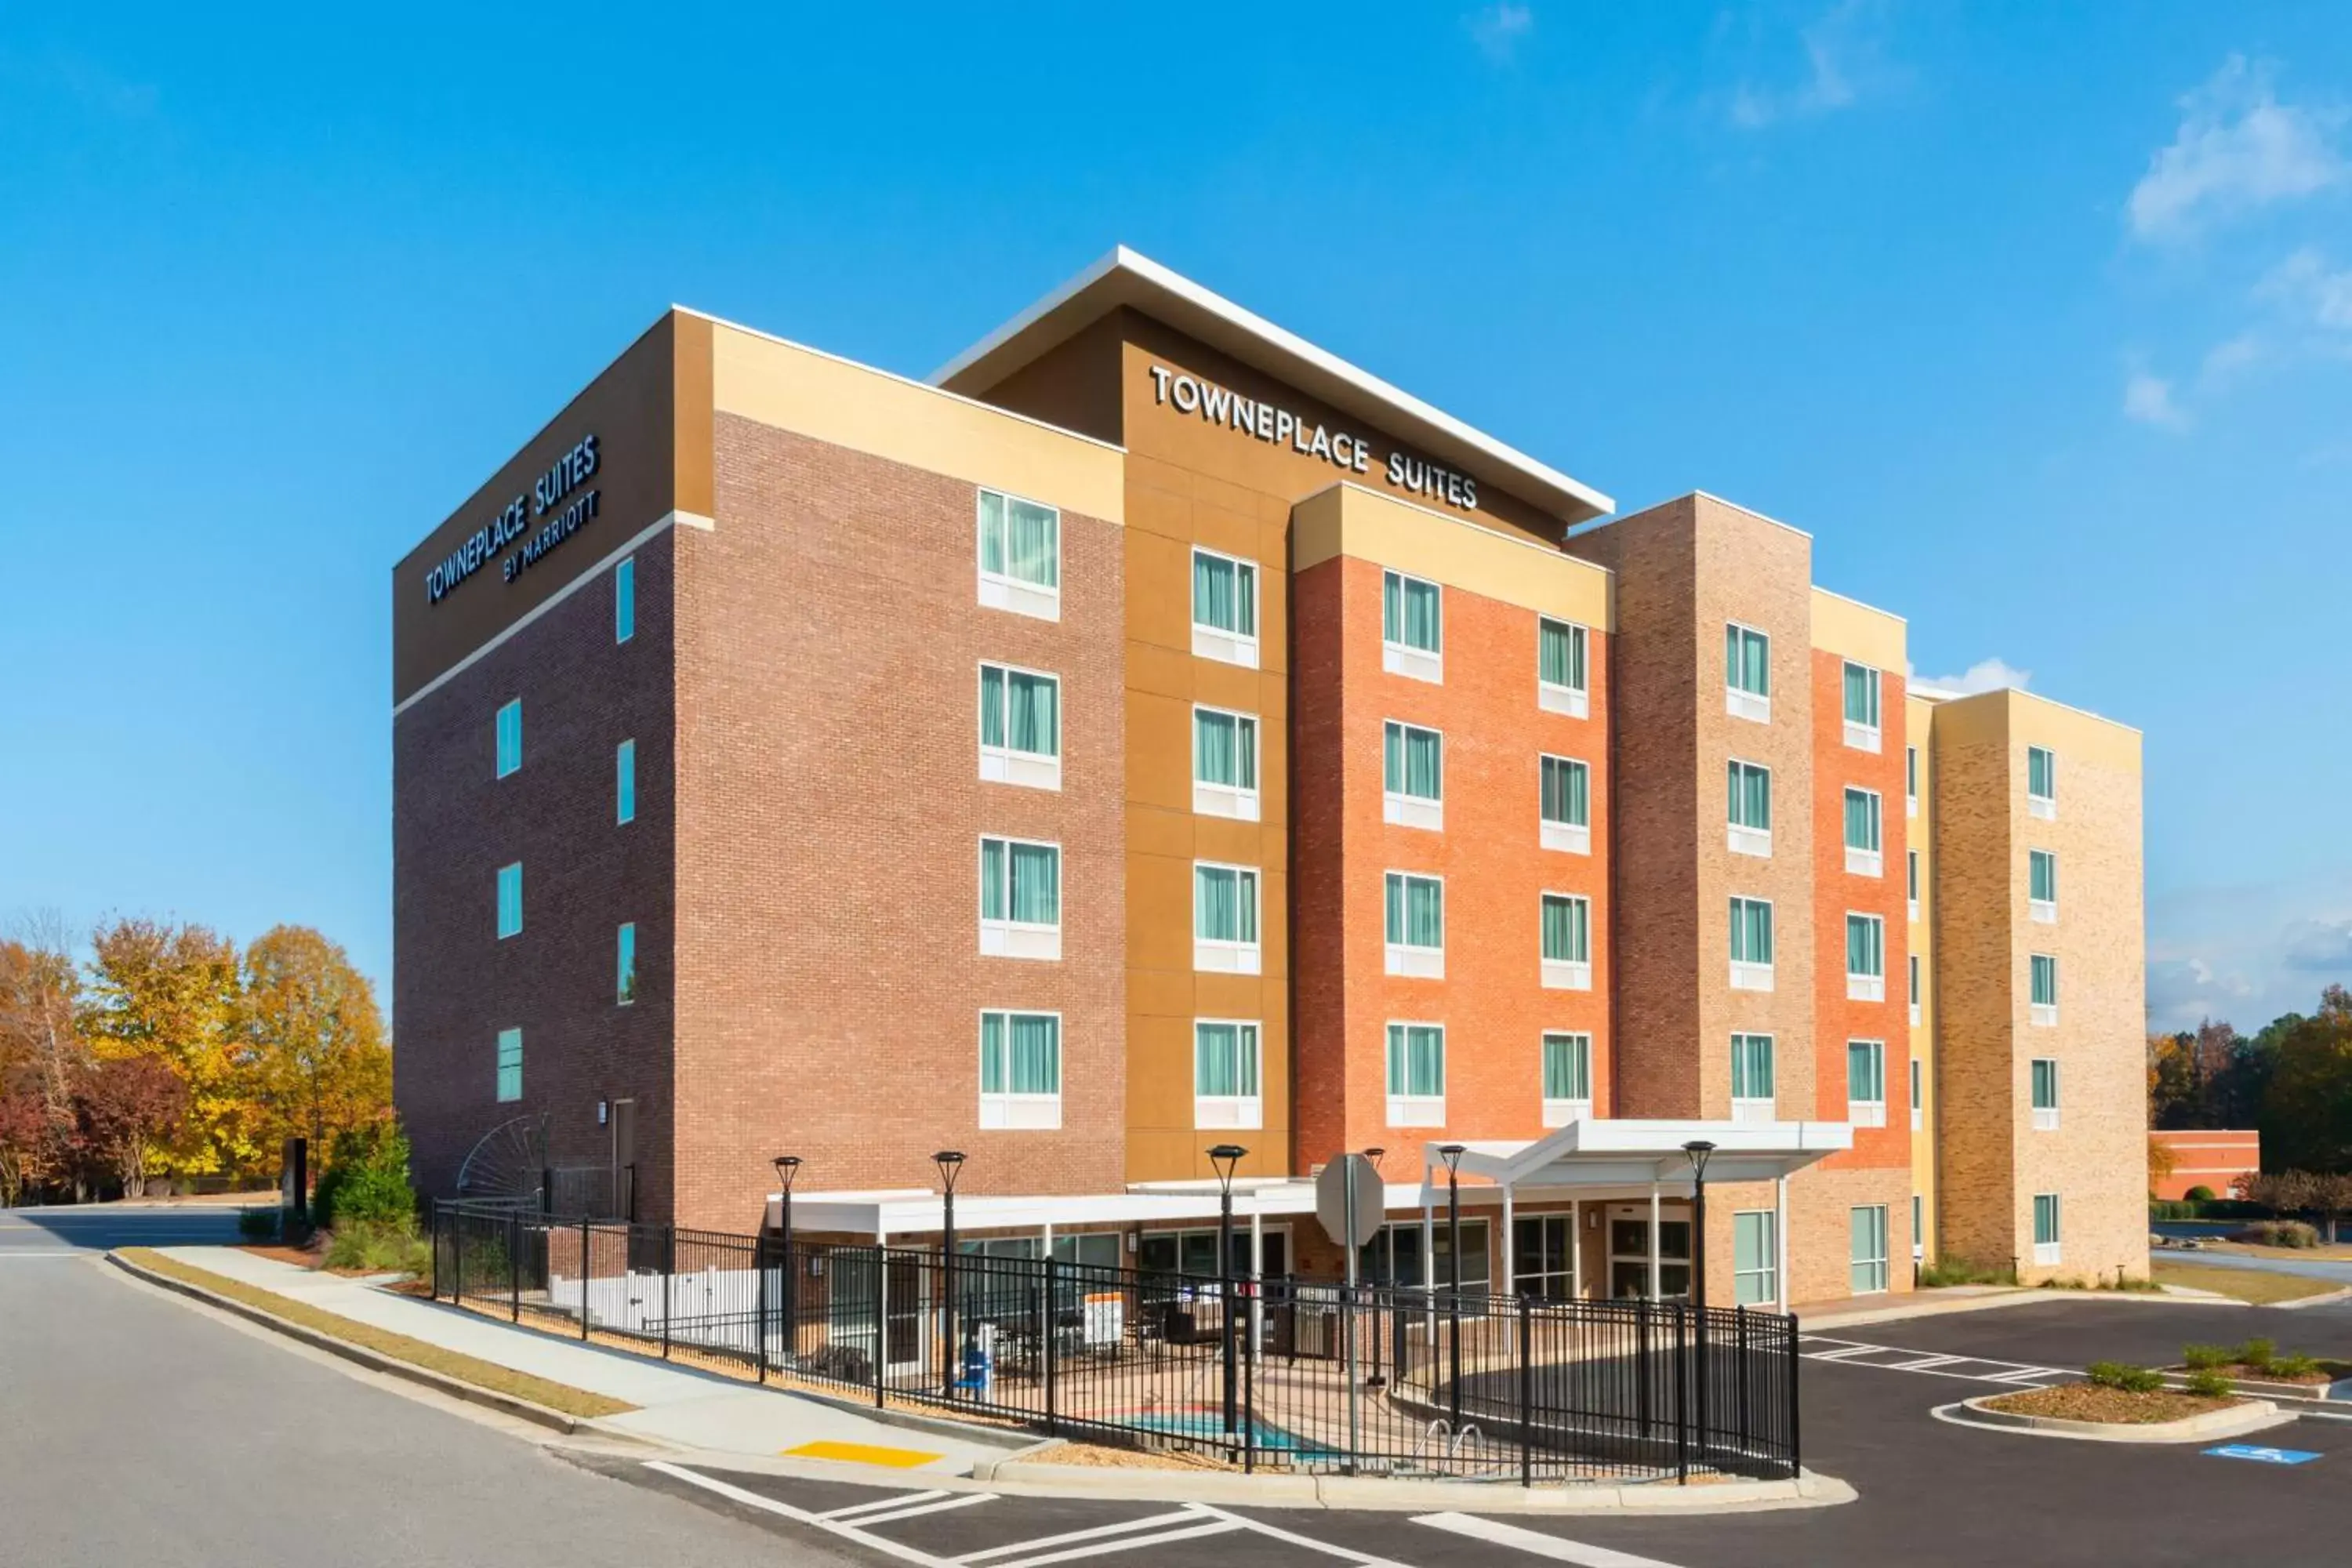 Property Building in TownePlace Suites Atlanta Lawrenceville